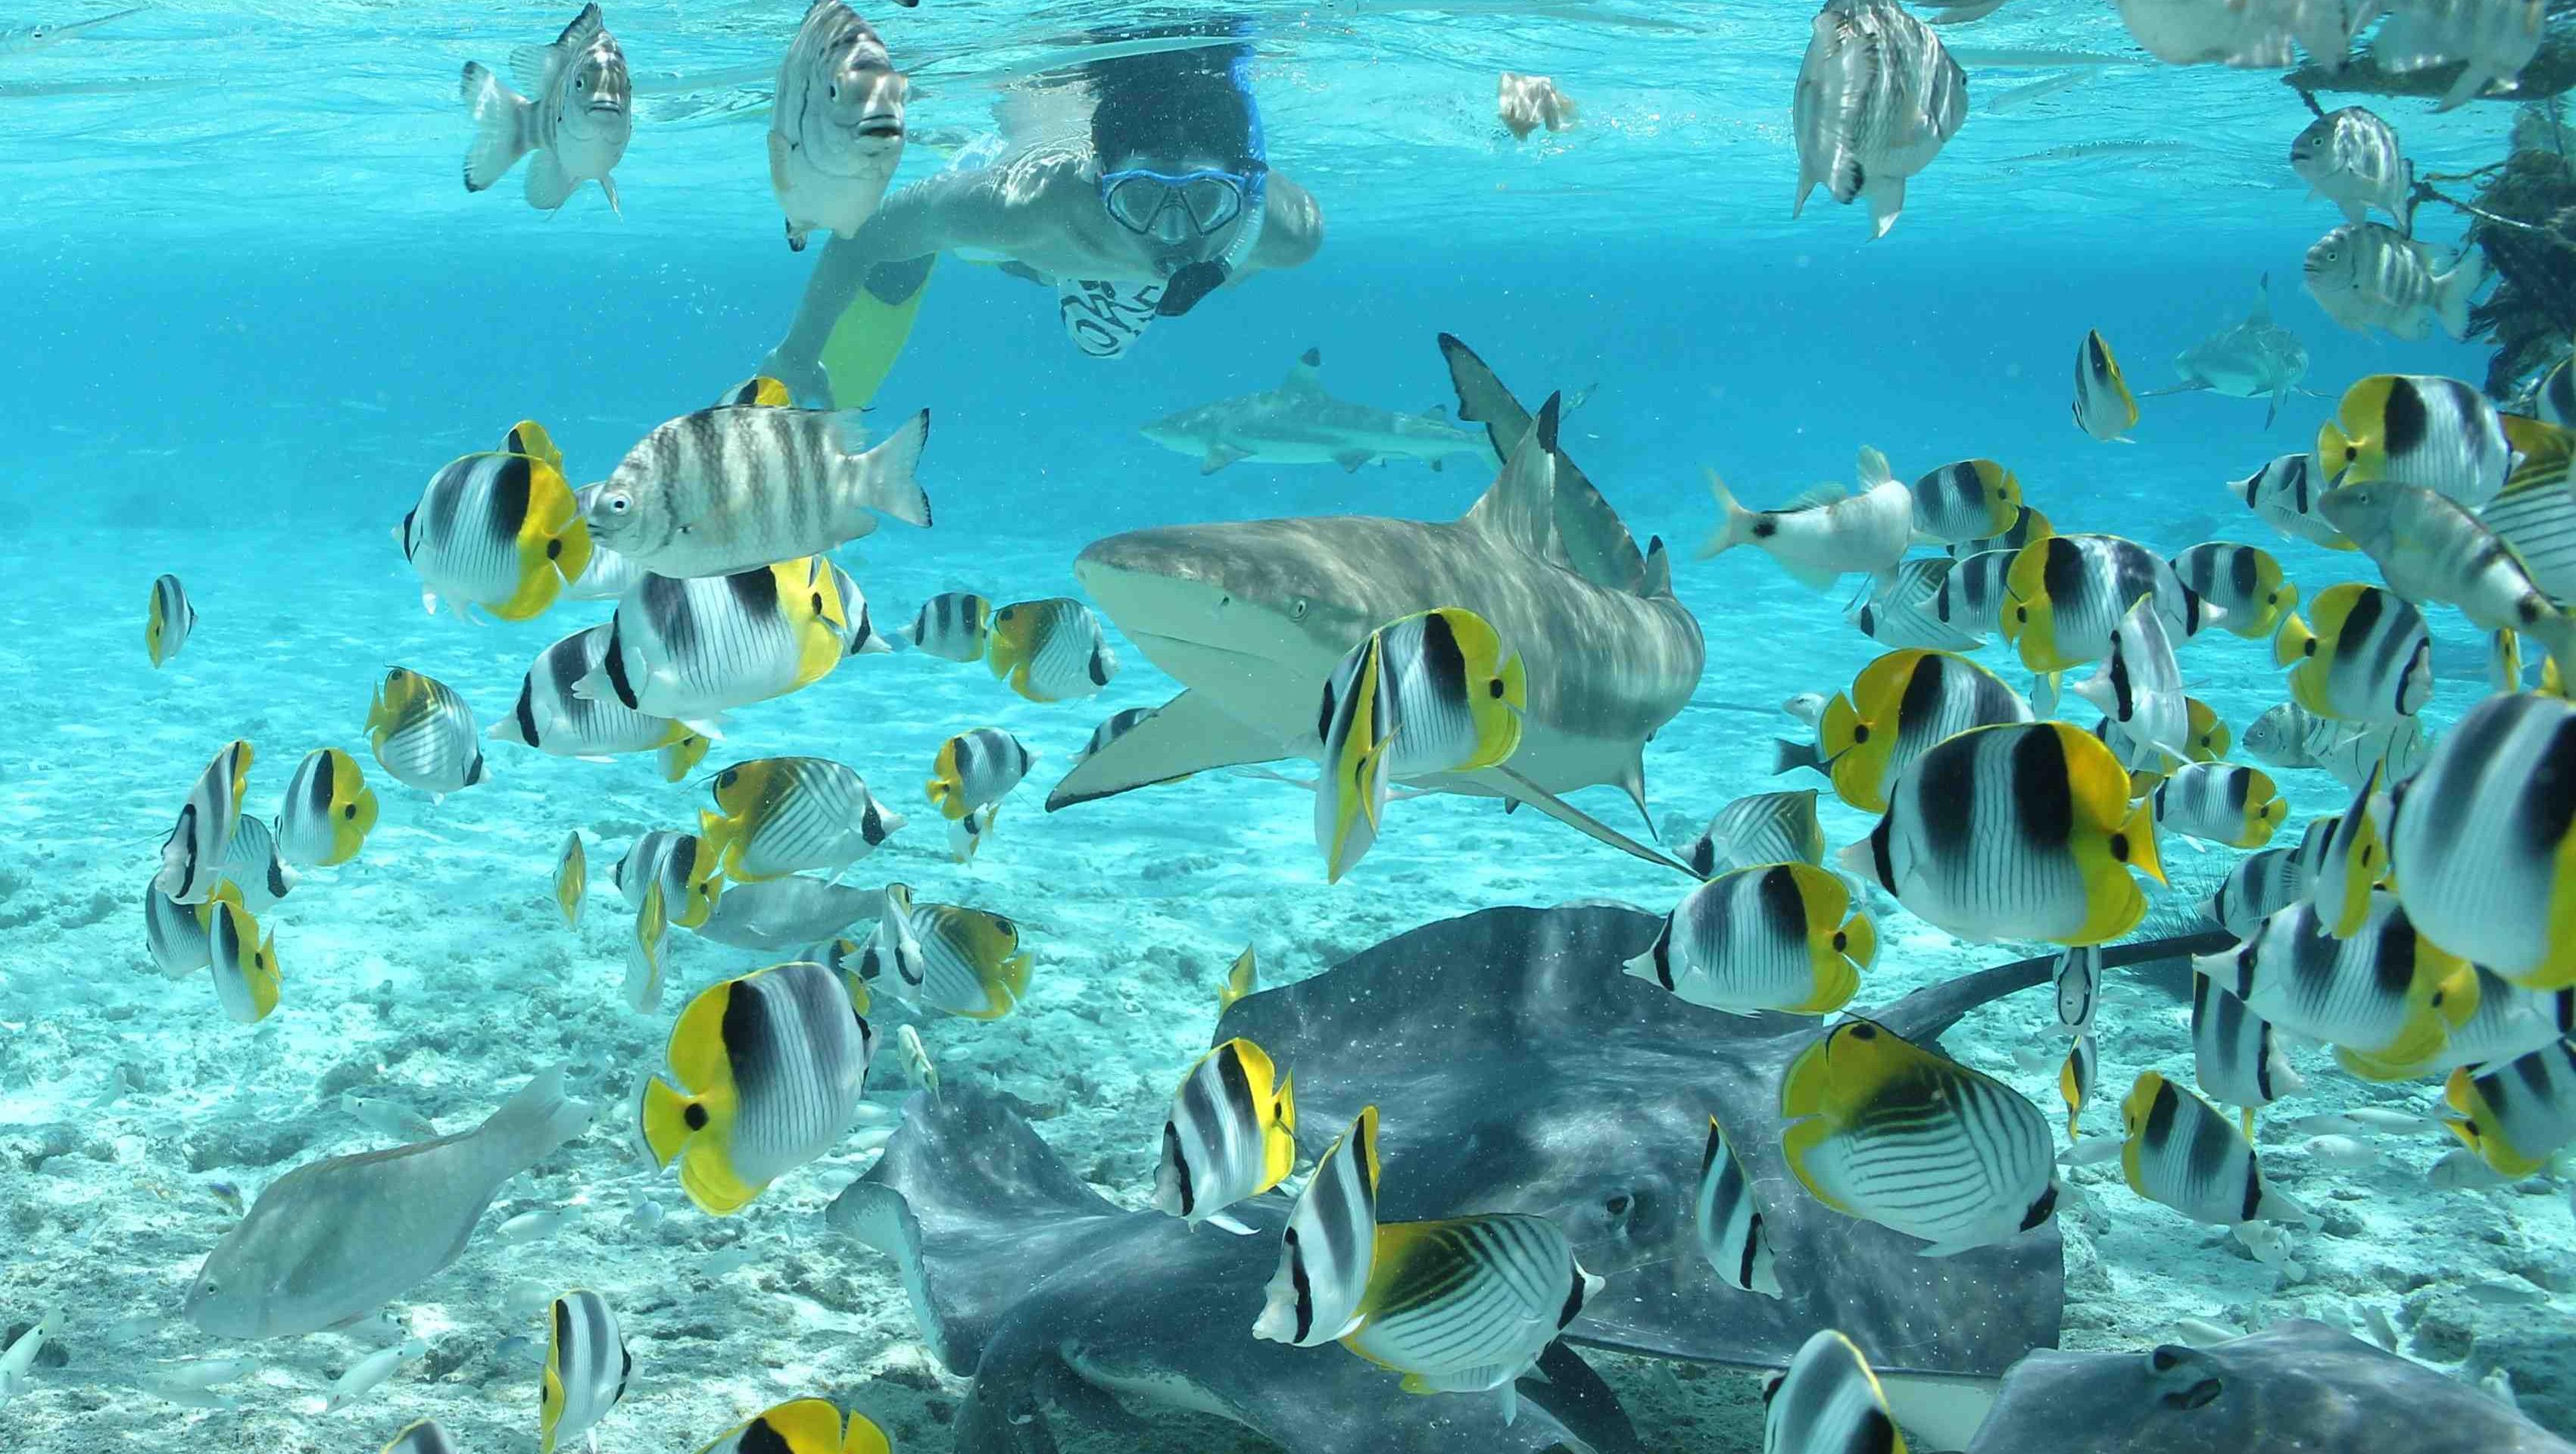 Snorkeling (with a mask and tuba) with rays and sharks at Bora Bora - in French